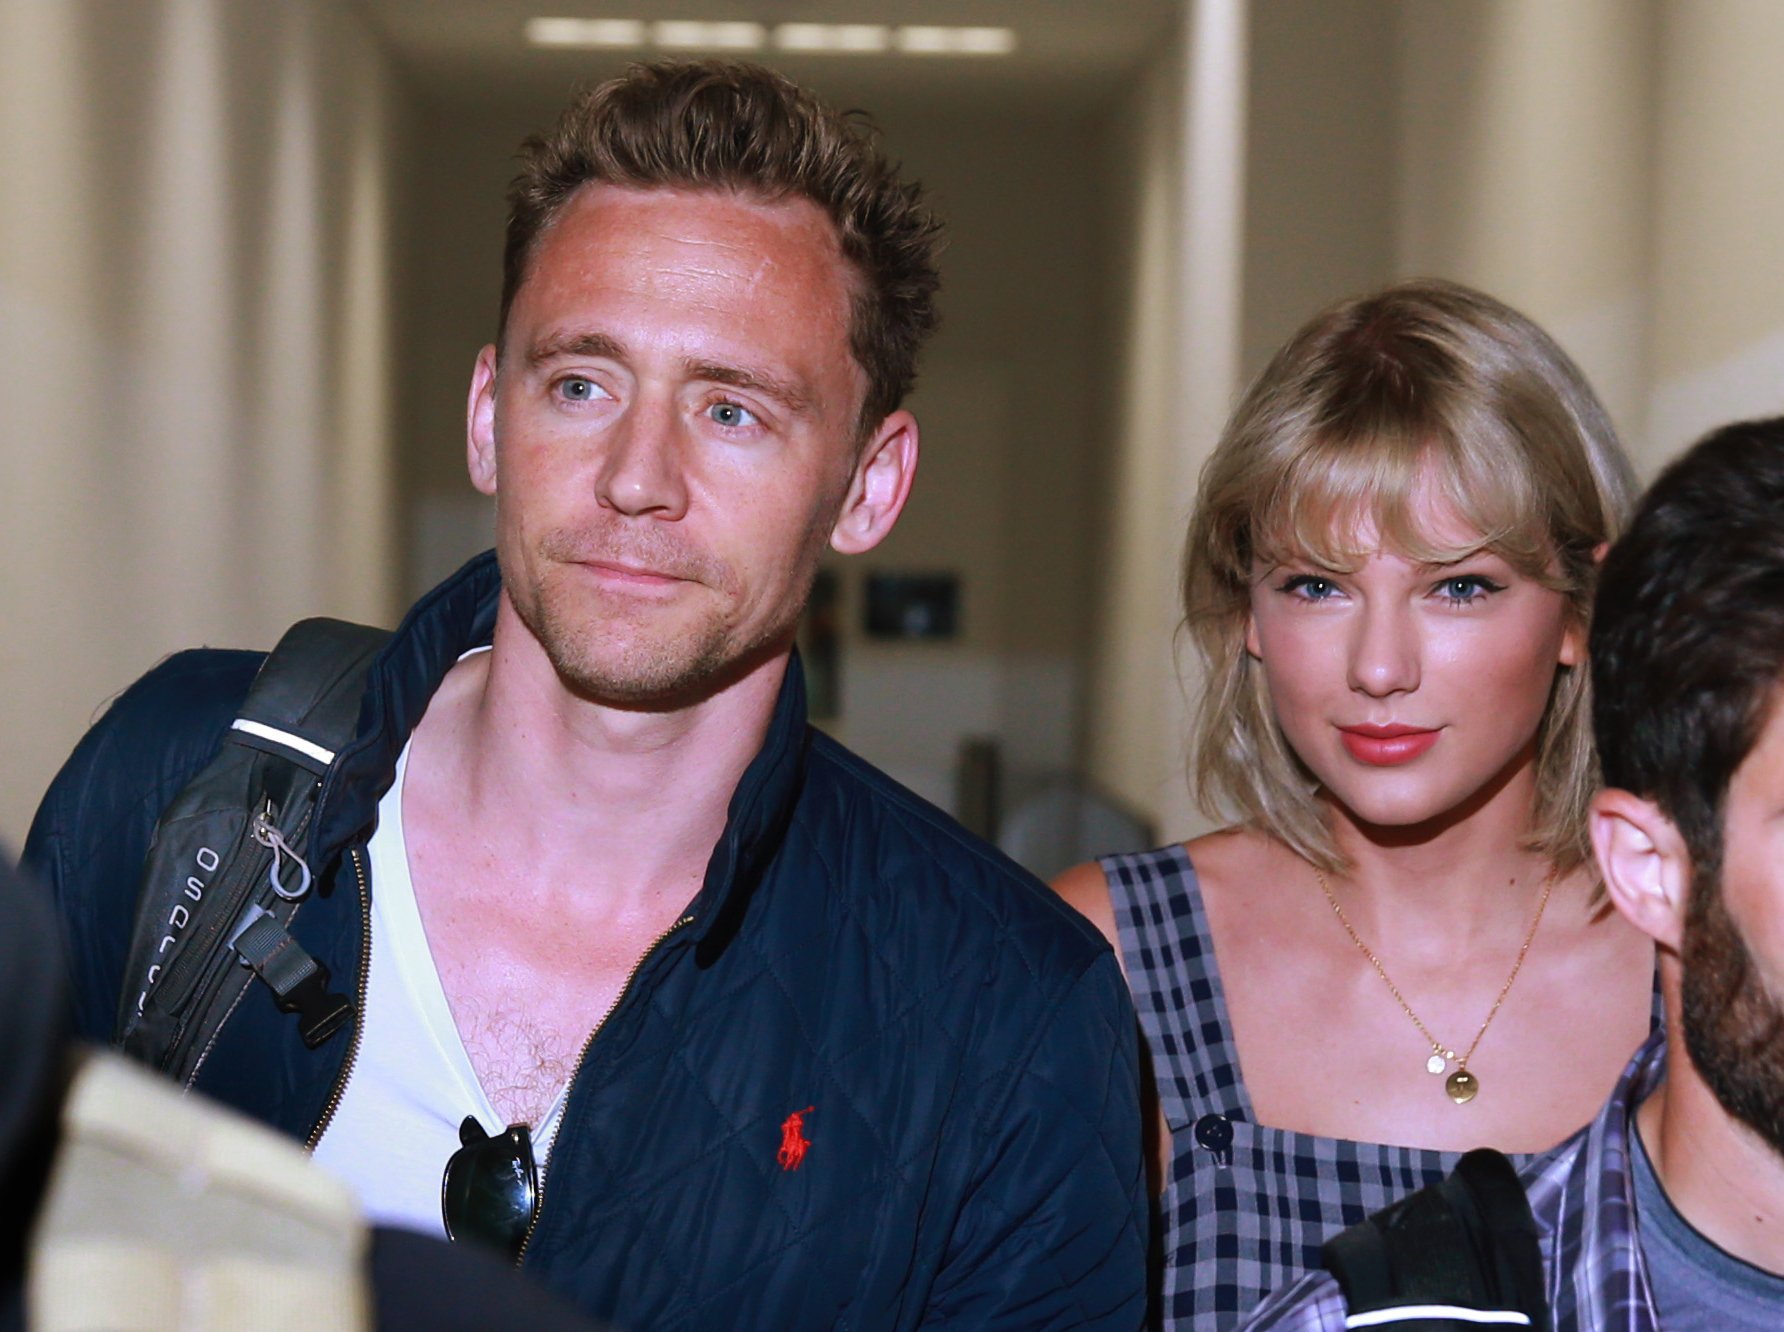 Tom Hiddleston wearing a white shirt and blue jacket and standing next to Taylor Swift